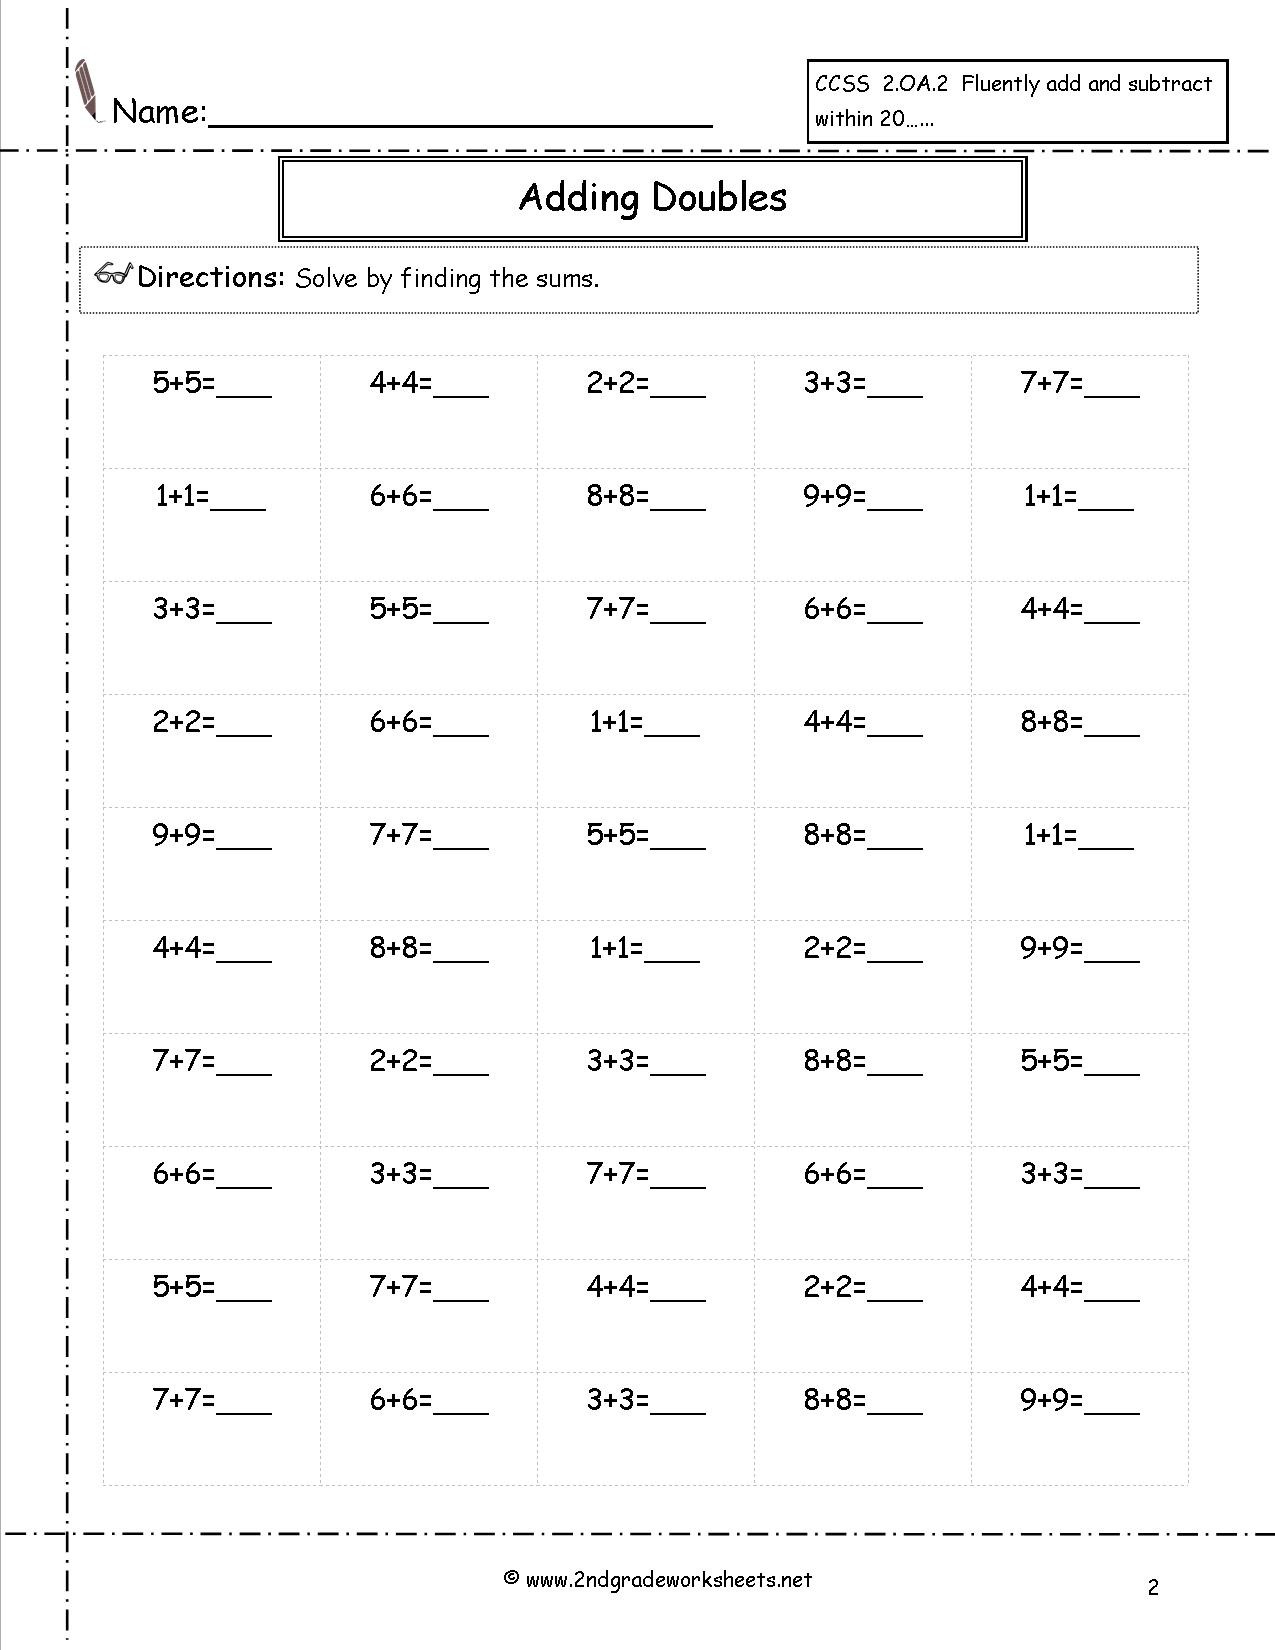 Free Math Worksheets Second Grade 2 Subtraction Subtracting 1 Digit From 3 Digit with Regrouping